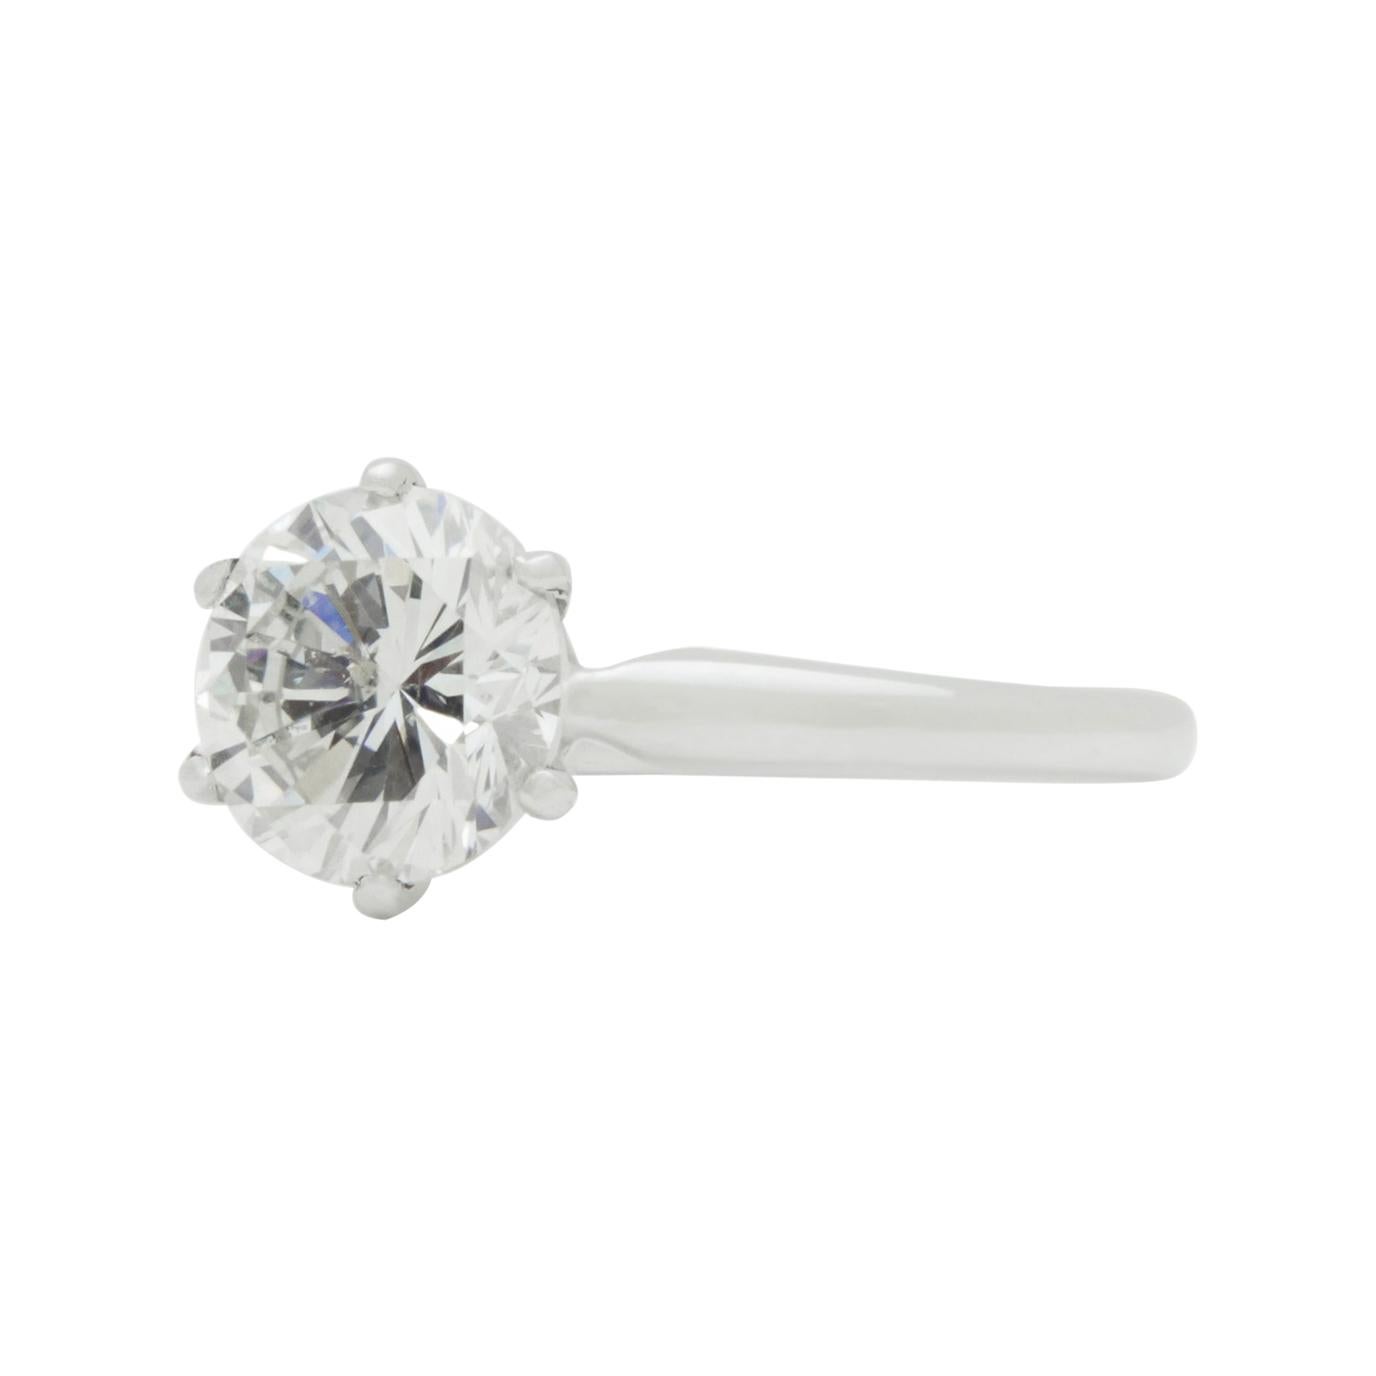 1.81 Carat Diamond and Platinum Ring by Bailey, Banks and Biddle For Sale